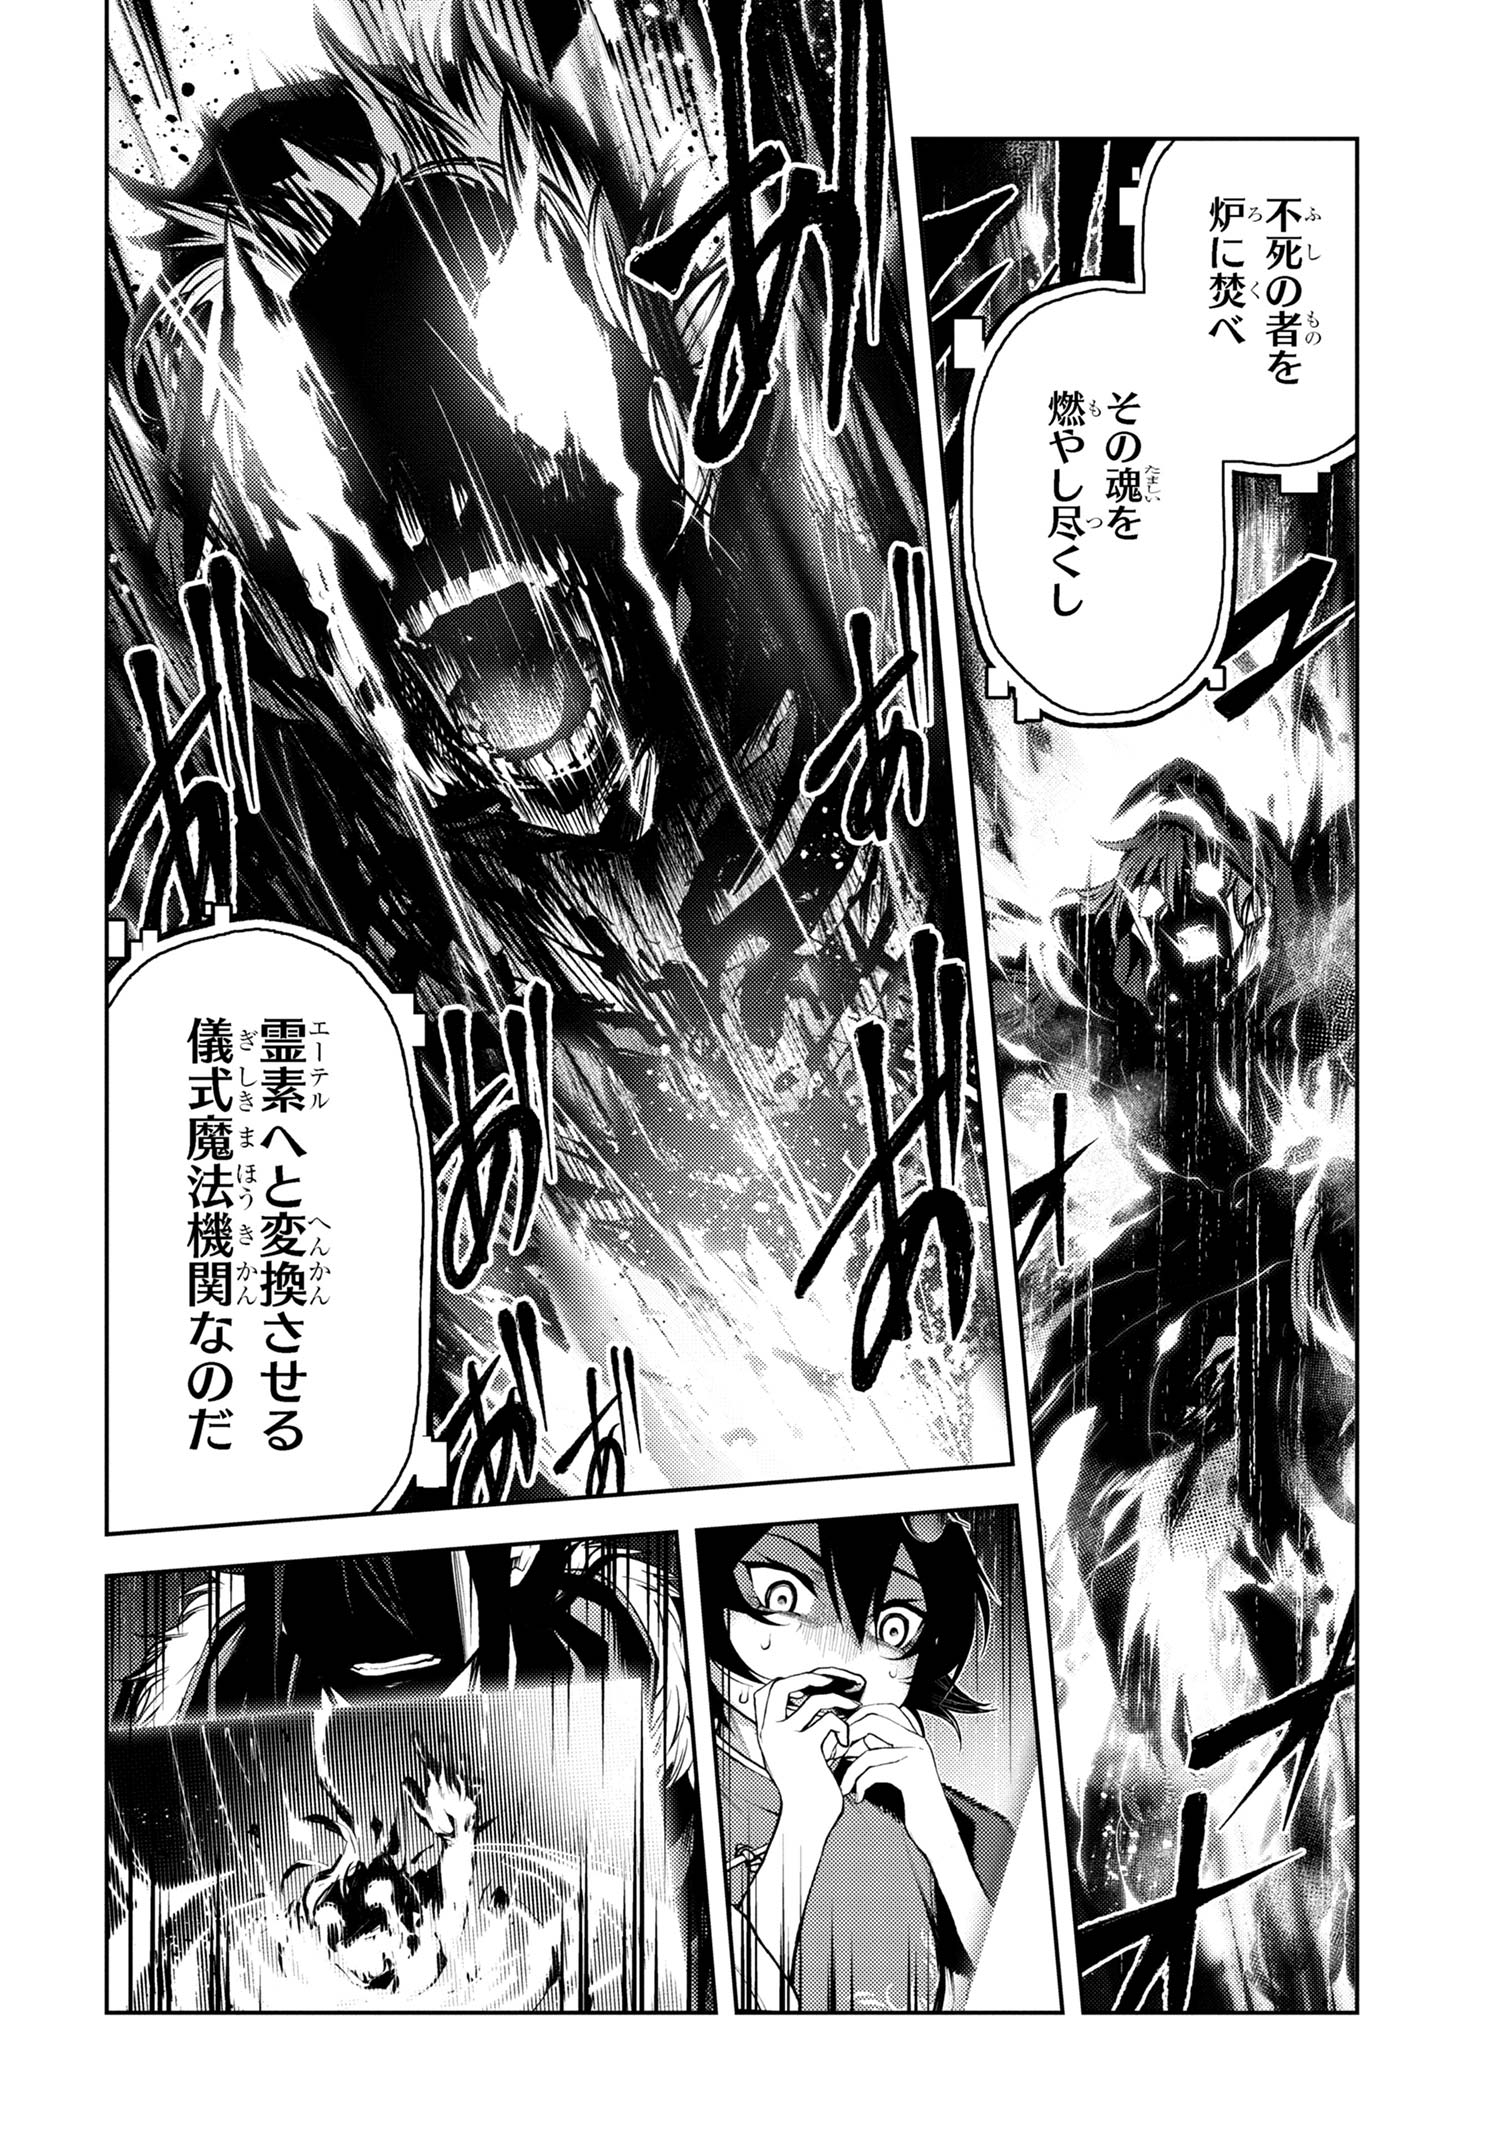 Maou 2099 - Chapter 7.2 - Page 3